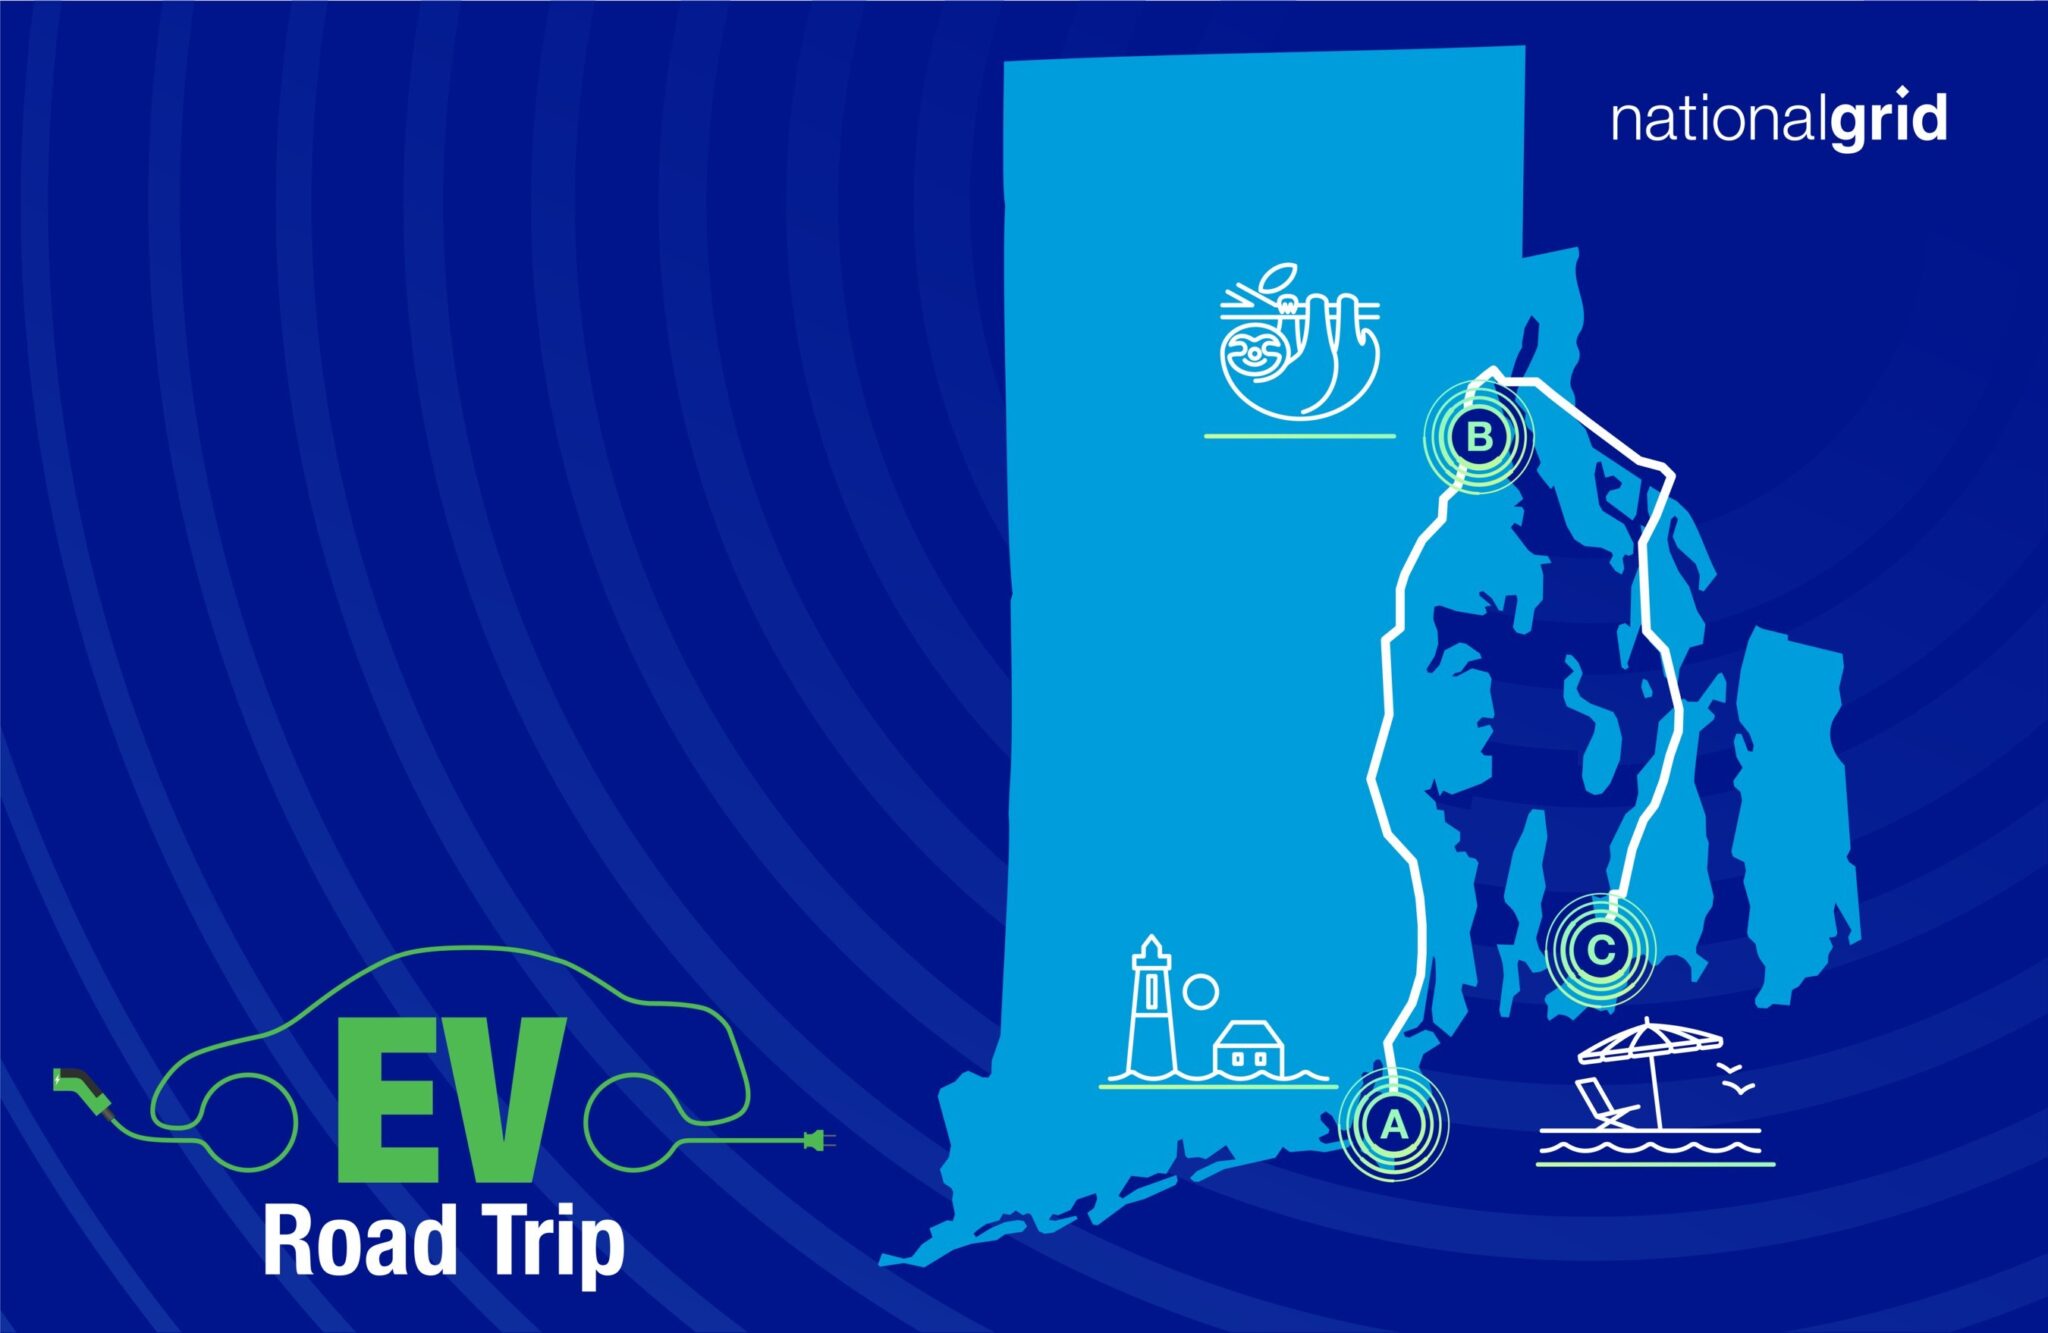 National Grid Launches Electric Vehicle Road Trip to Highlight